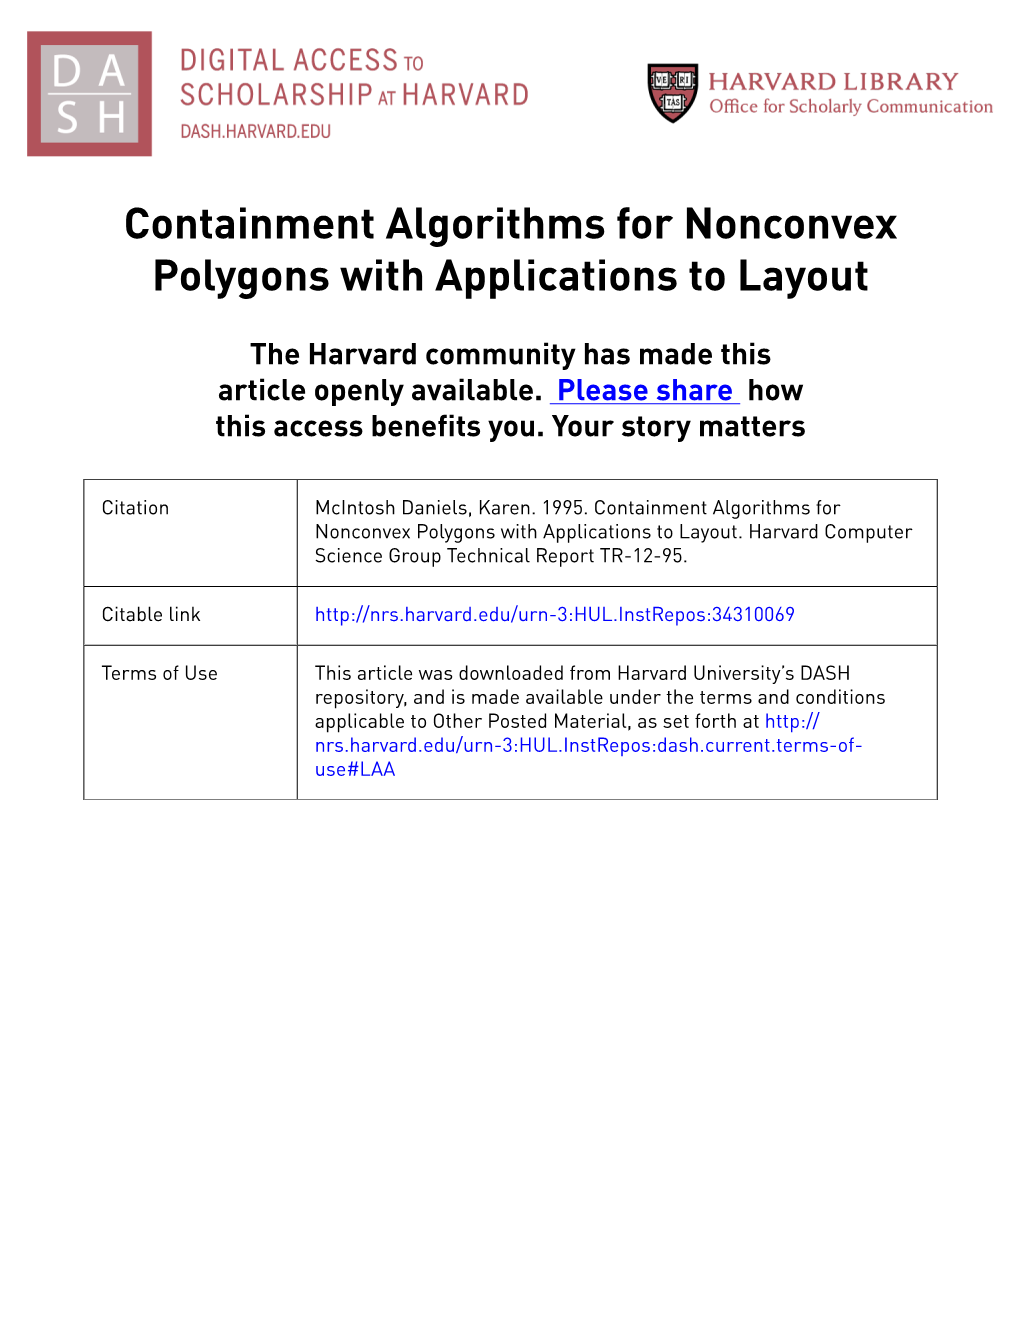 Containment Algorithms for Nonconvex Polygons with Applications to Layout